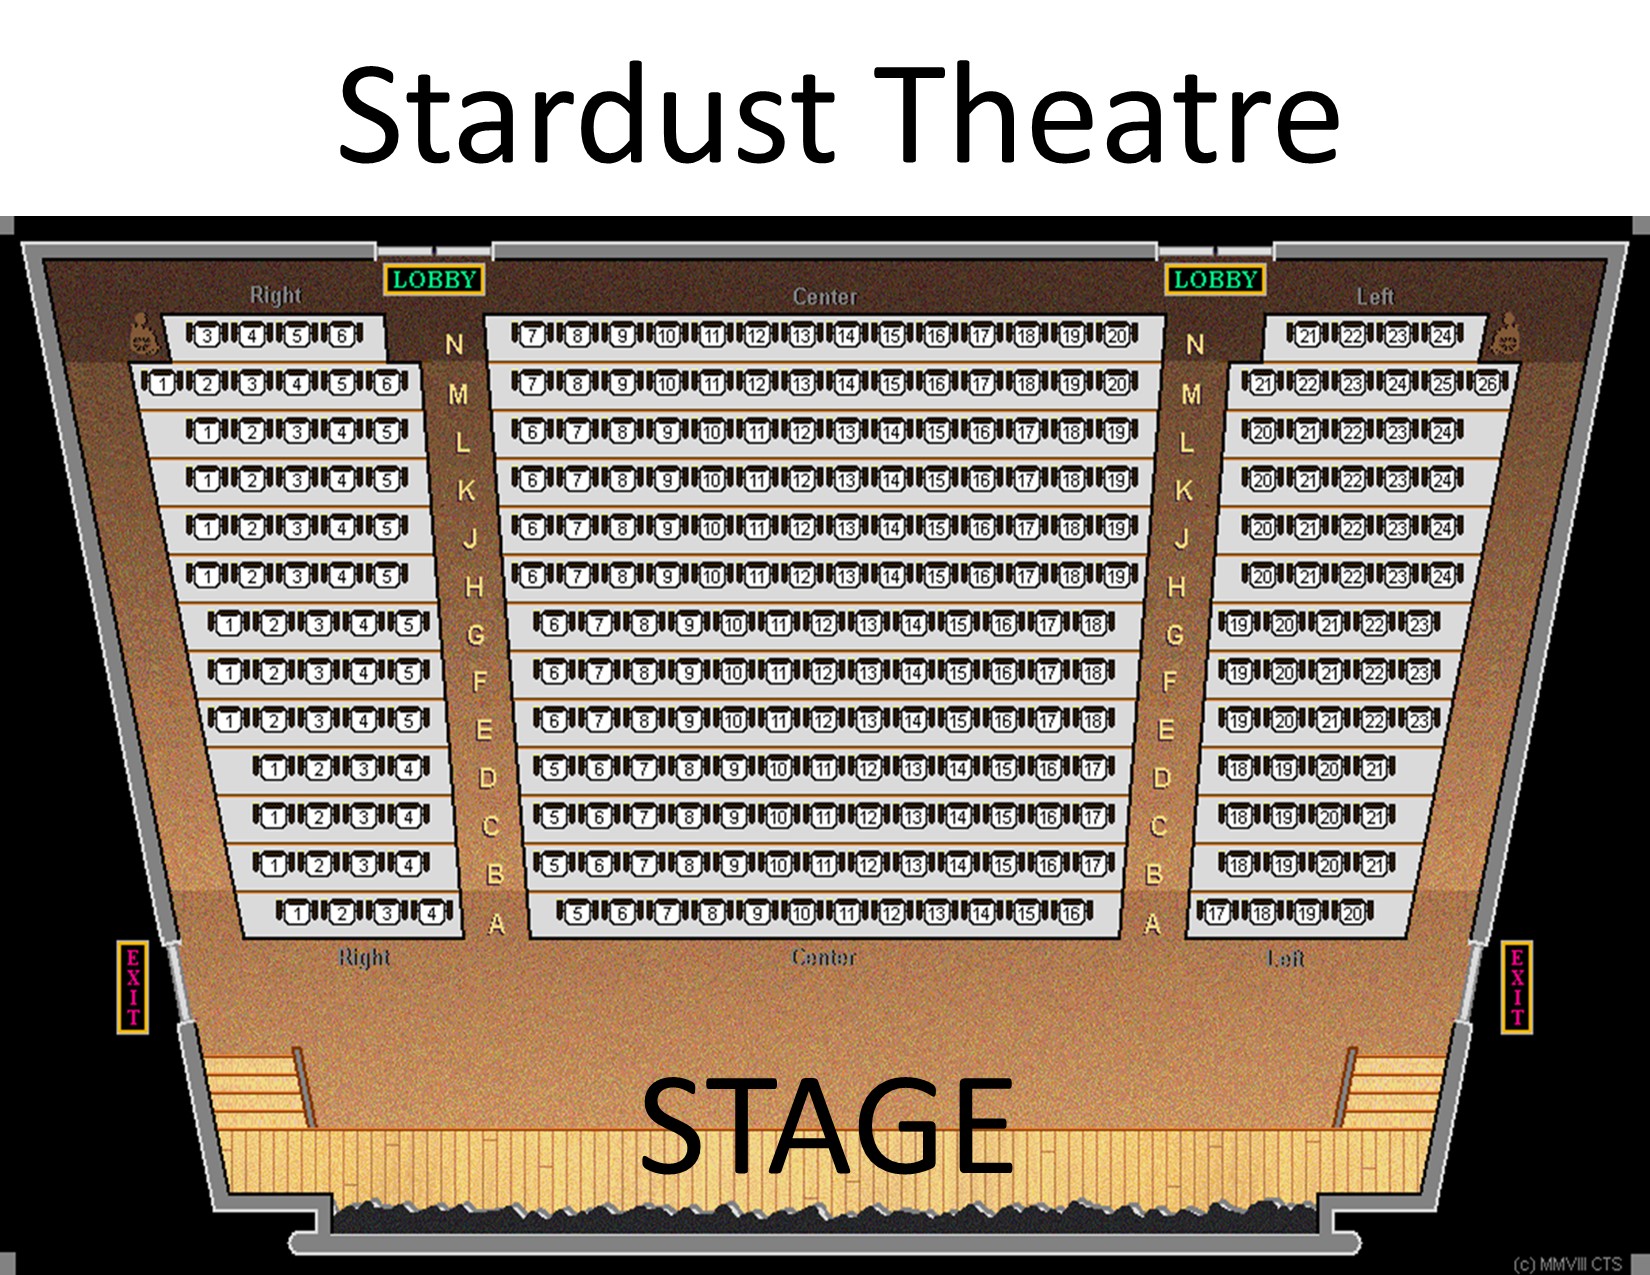 Stardust Theatre Seating Chart